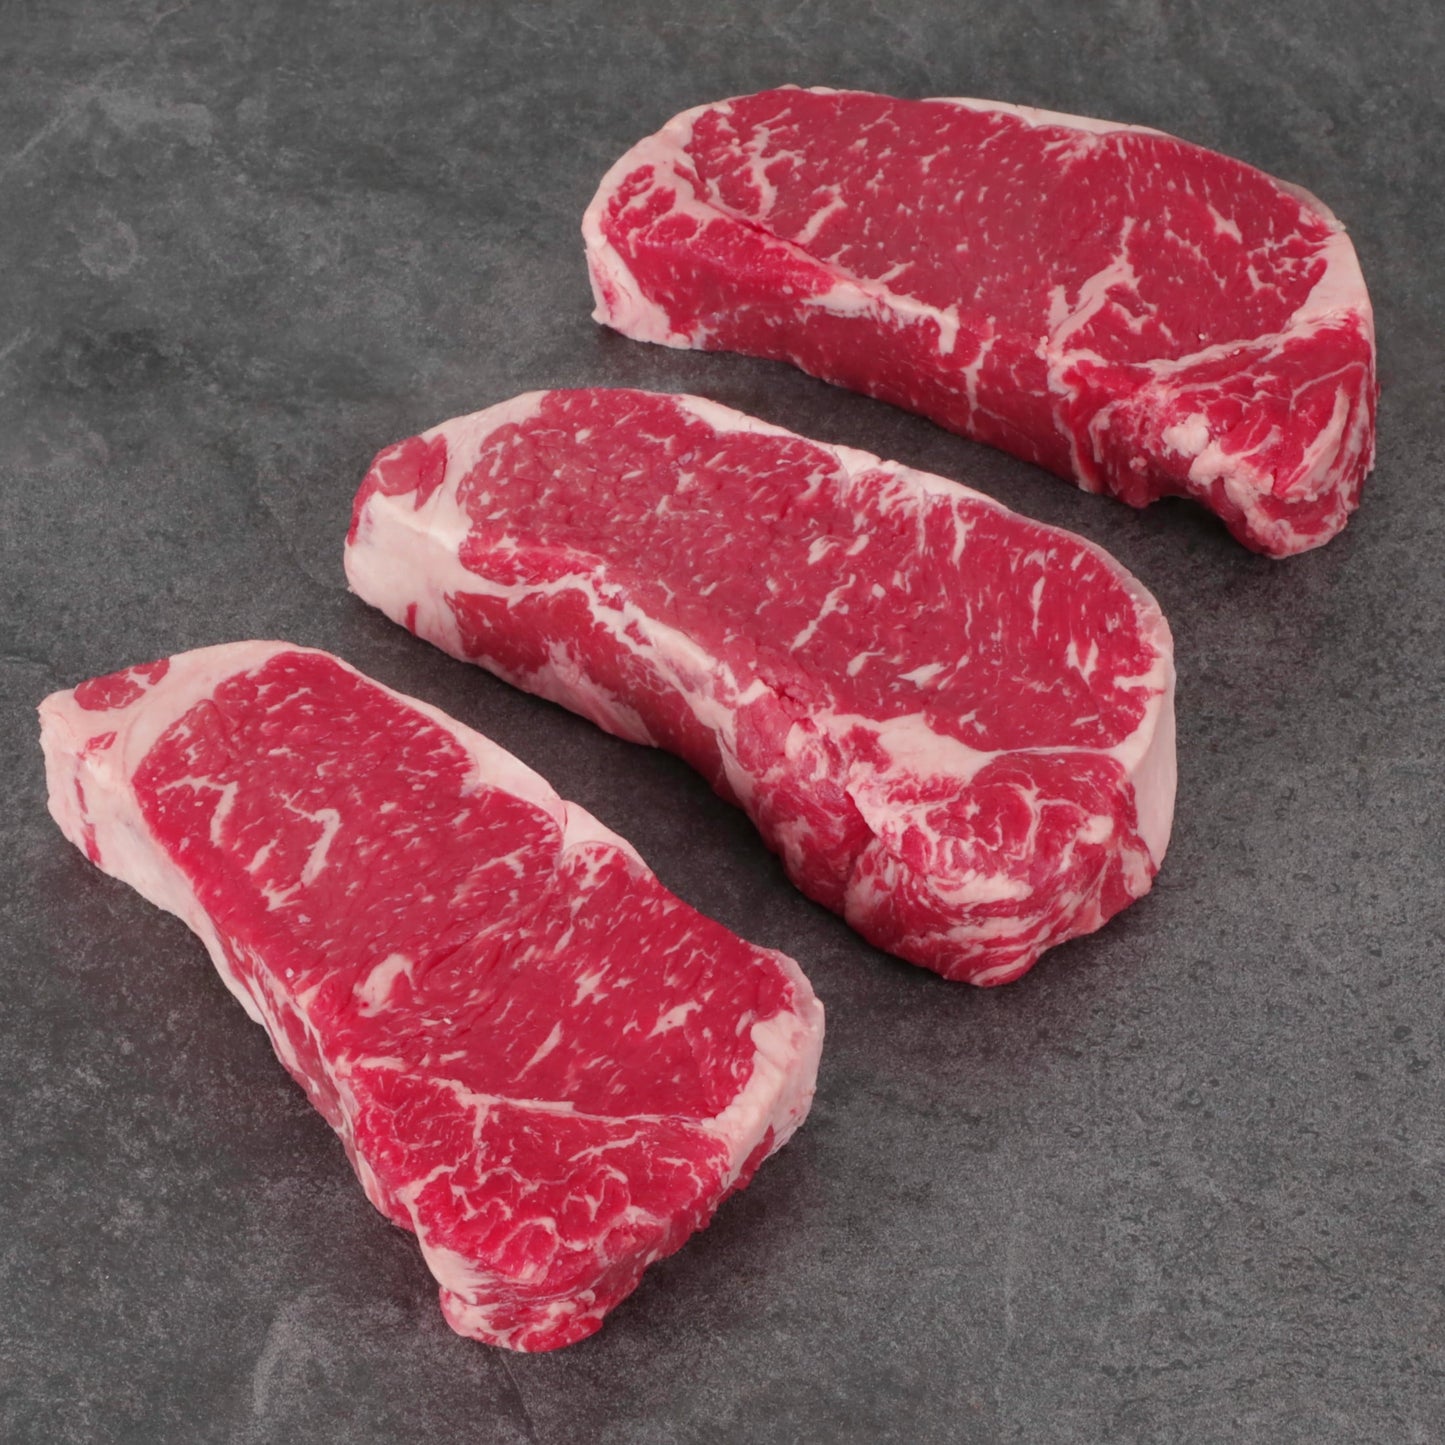 Beef Choice Angus New York Strip Steak Family Pack, 1.53 - 2.63 lb Tray